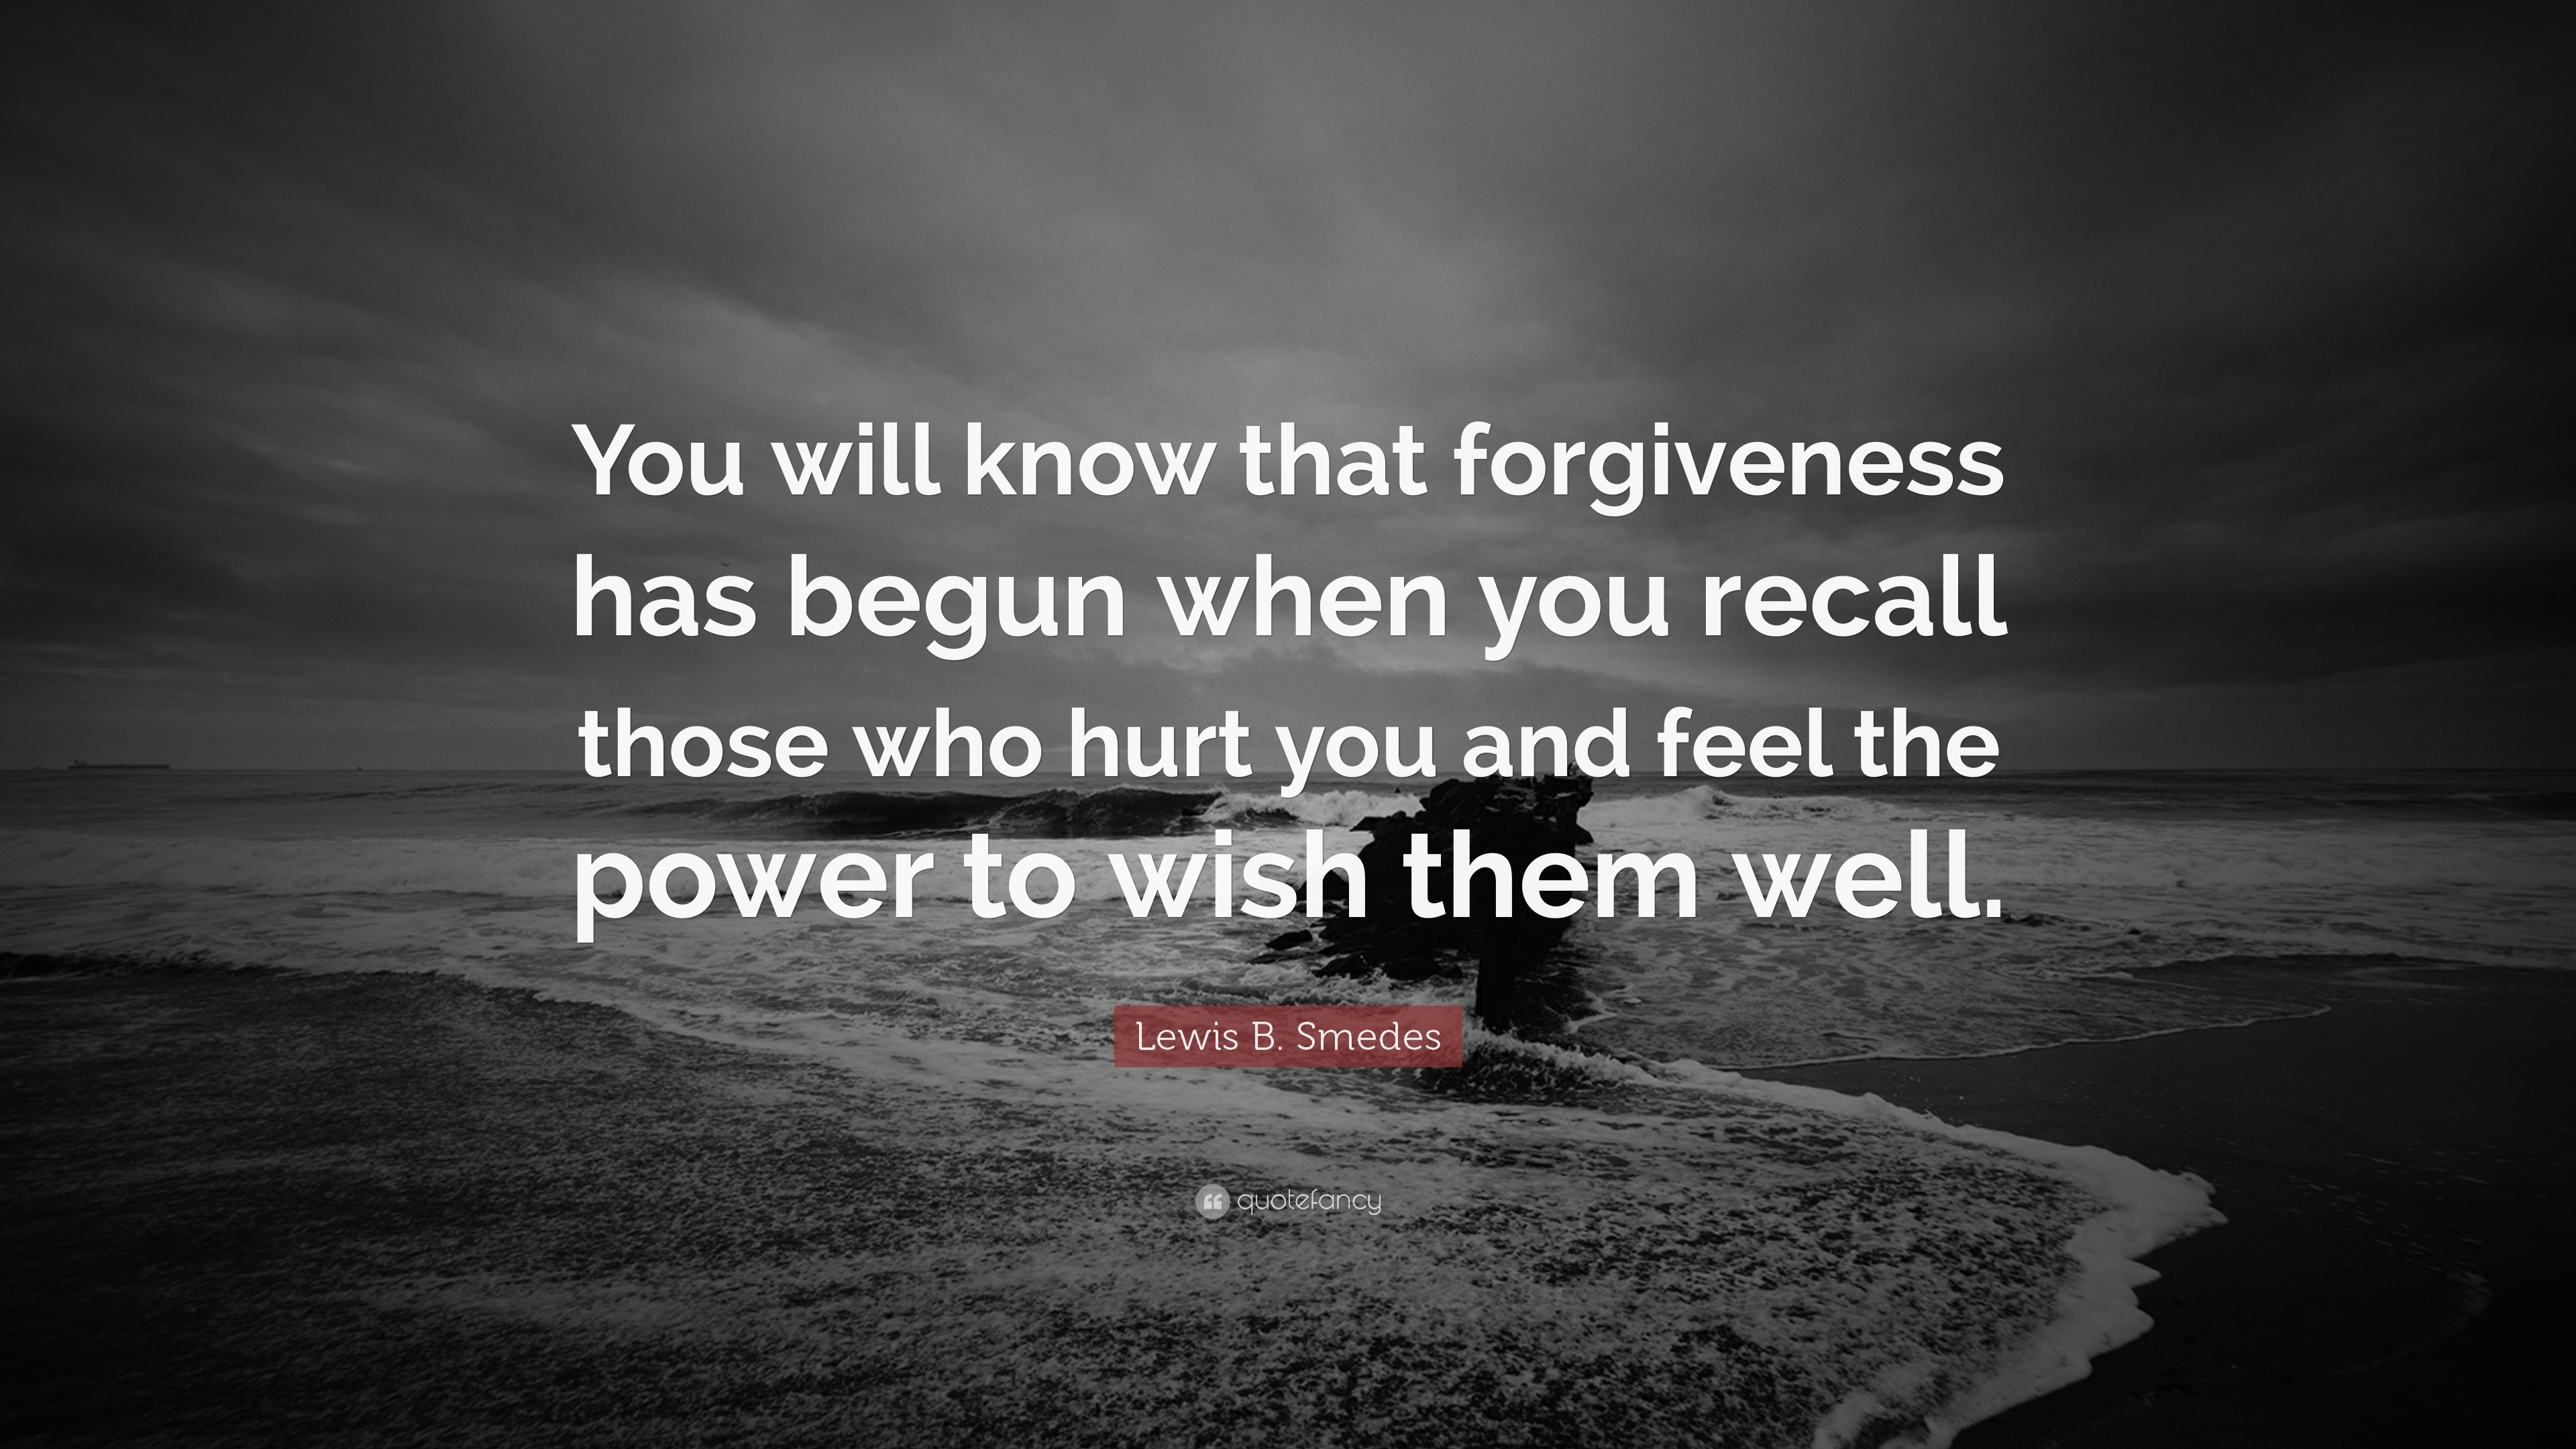 Lewis B. Smedes Quote: “You will know that forgiveness has begun when ...